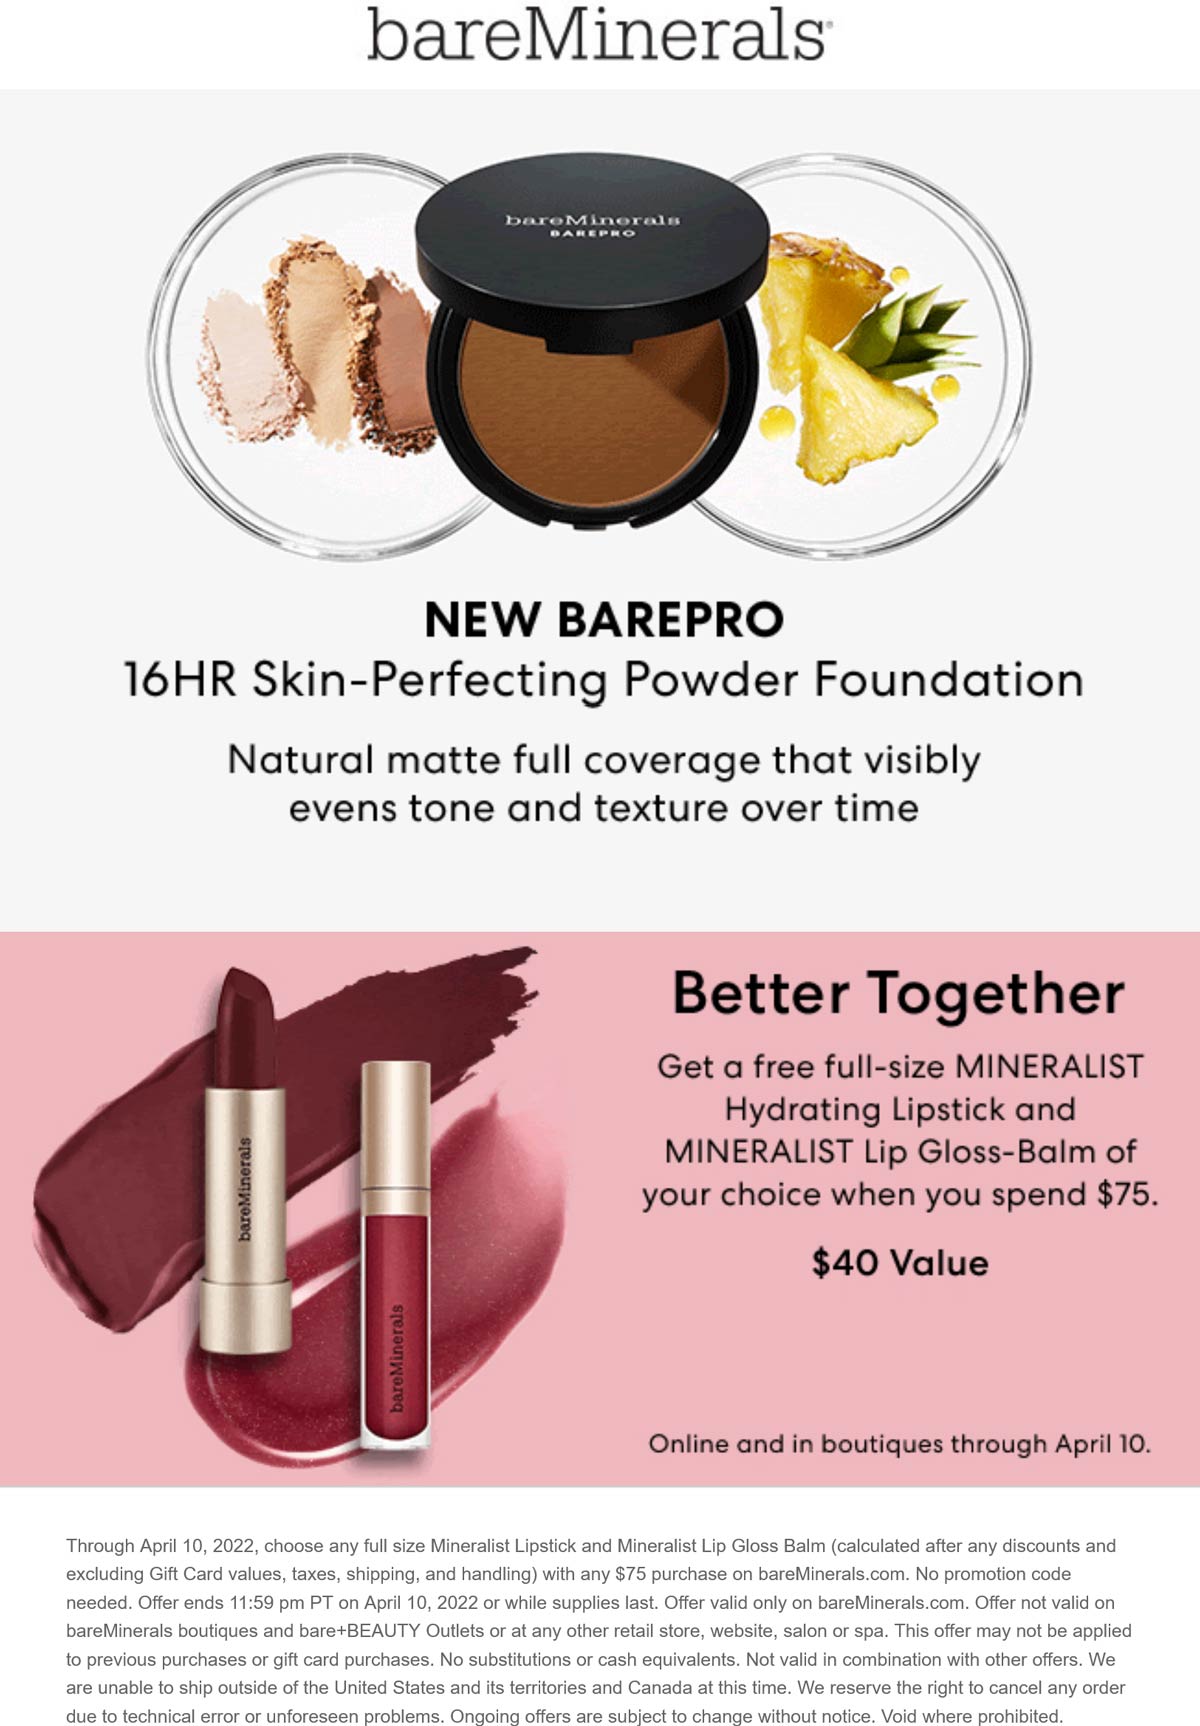 bareMinerals stores Coupon  Free full size lipstick or balm on $75 at bareMinerals, ditto online #bareminerals 